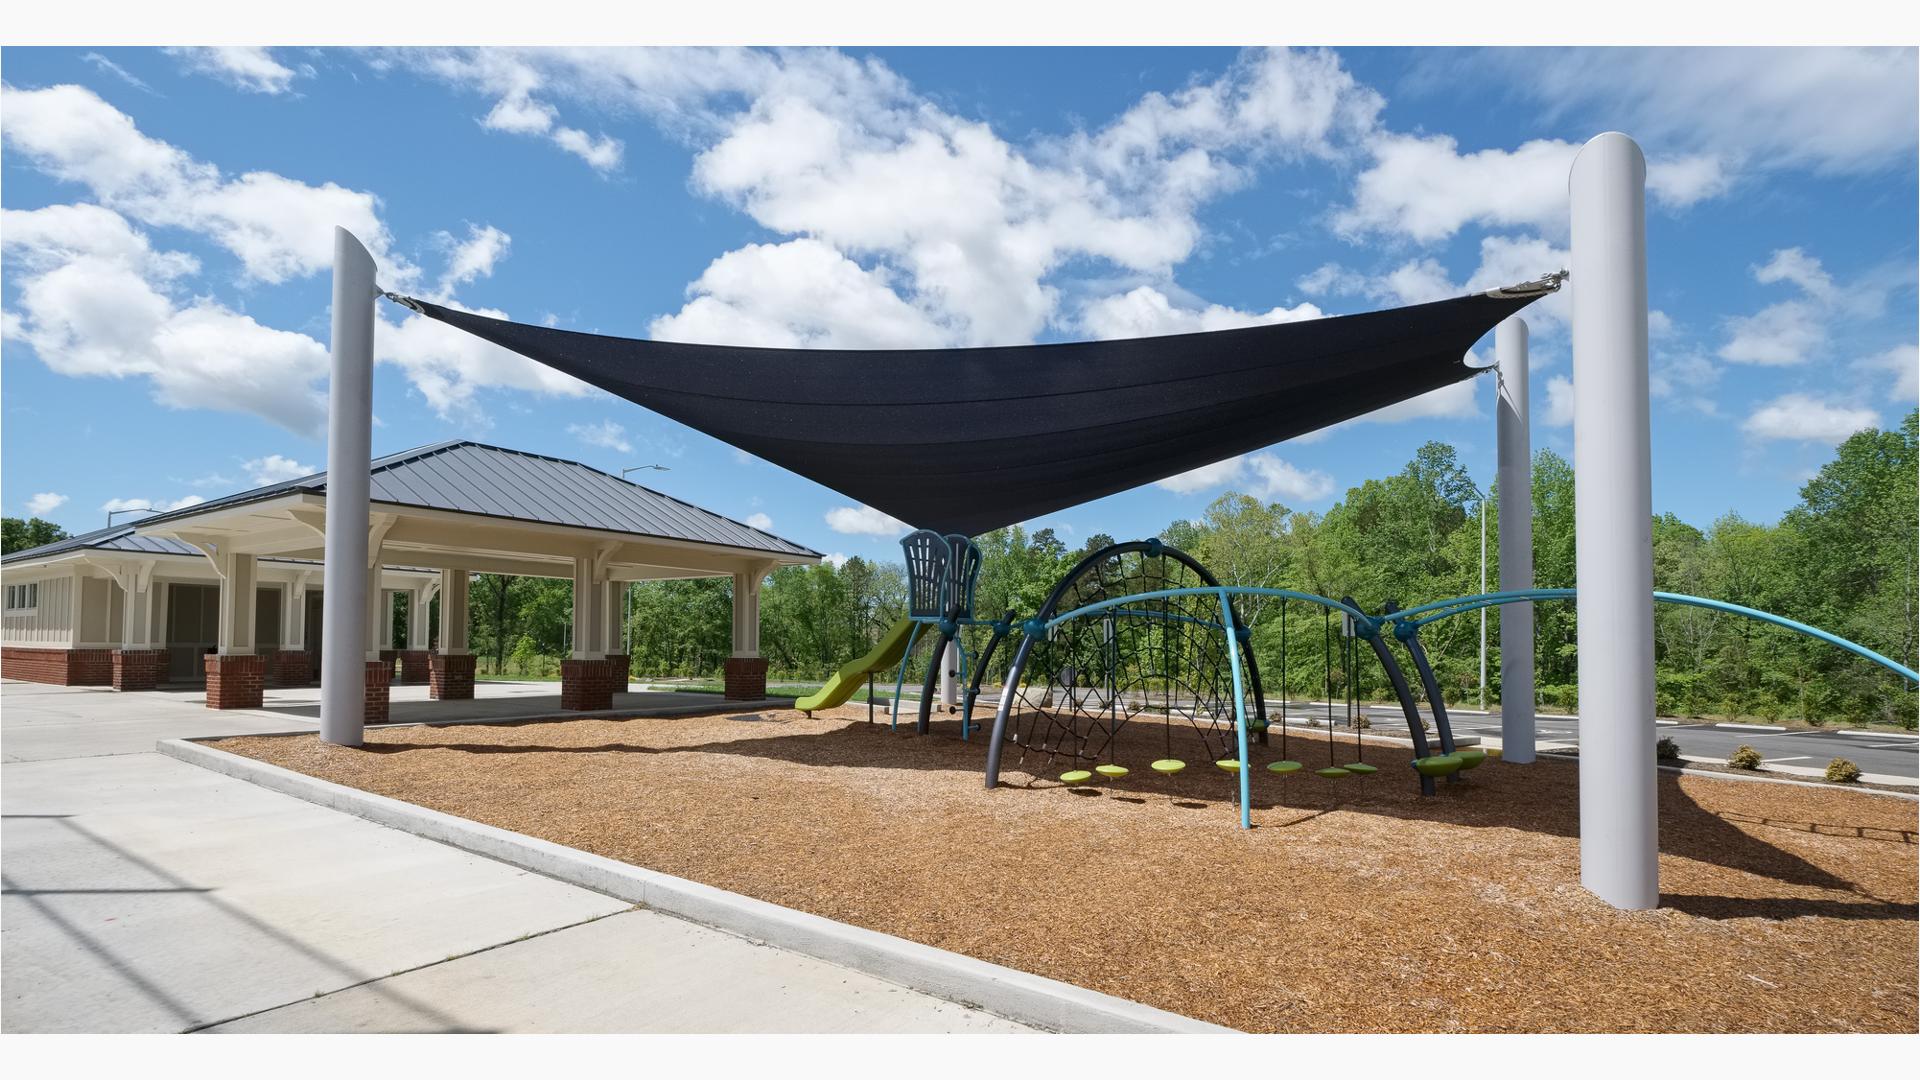 Custom Skyways Shade panel covers this Evos playground next to a ball field.